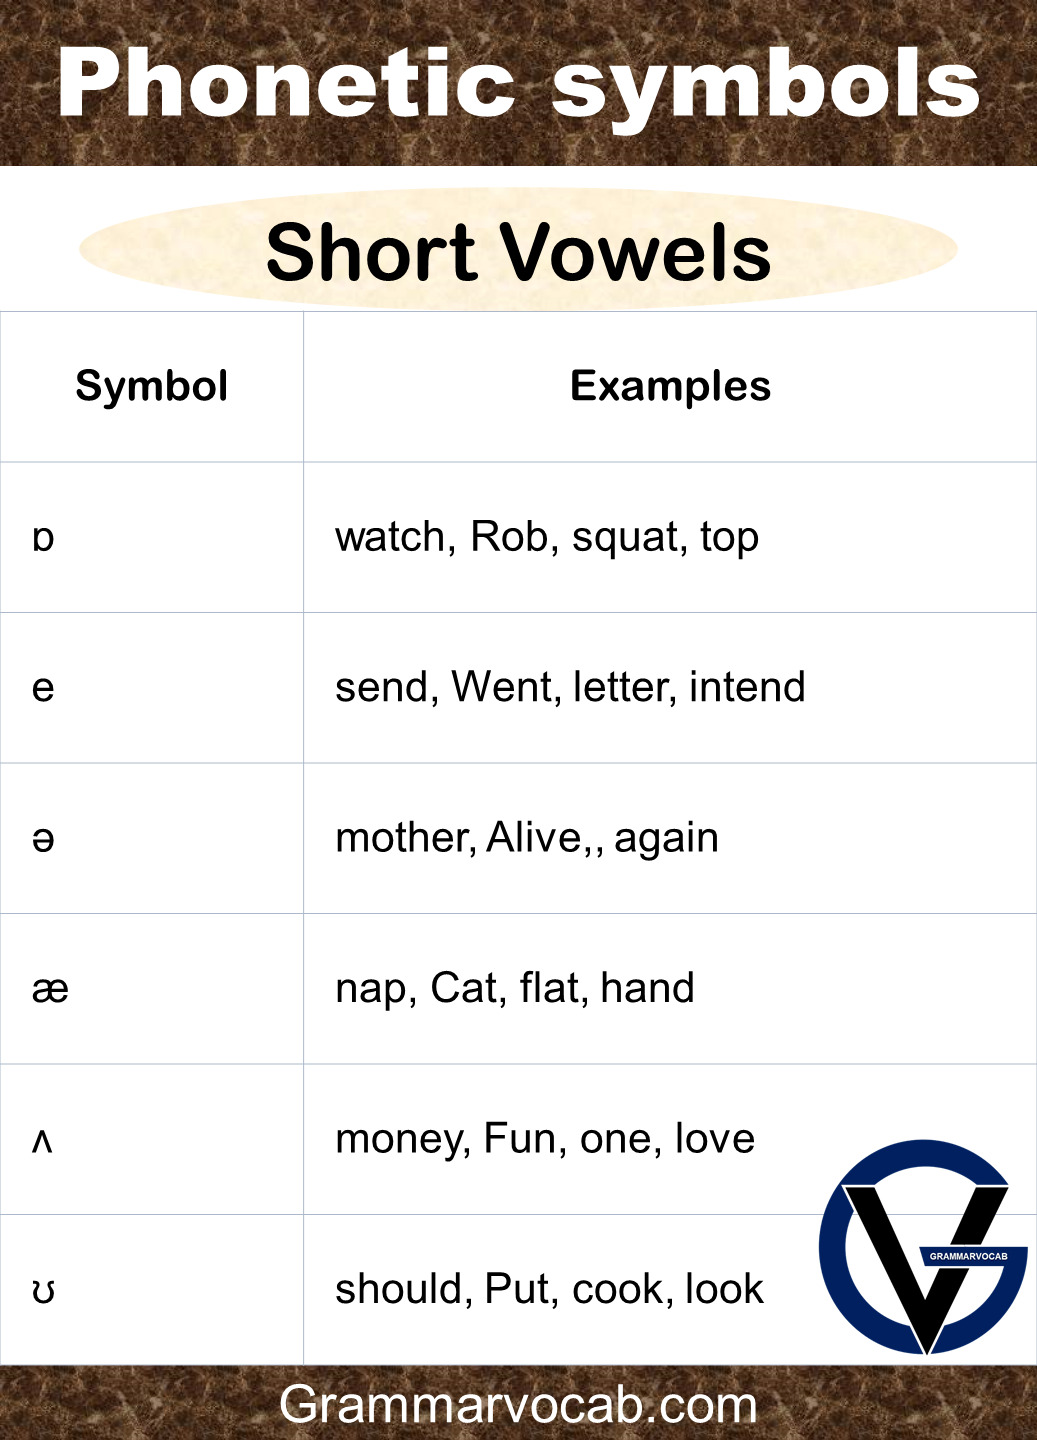 Phonetic symbols with examples in English